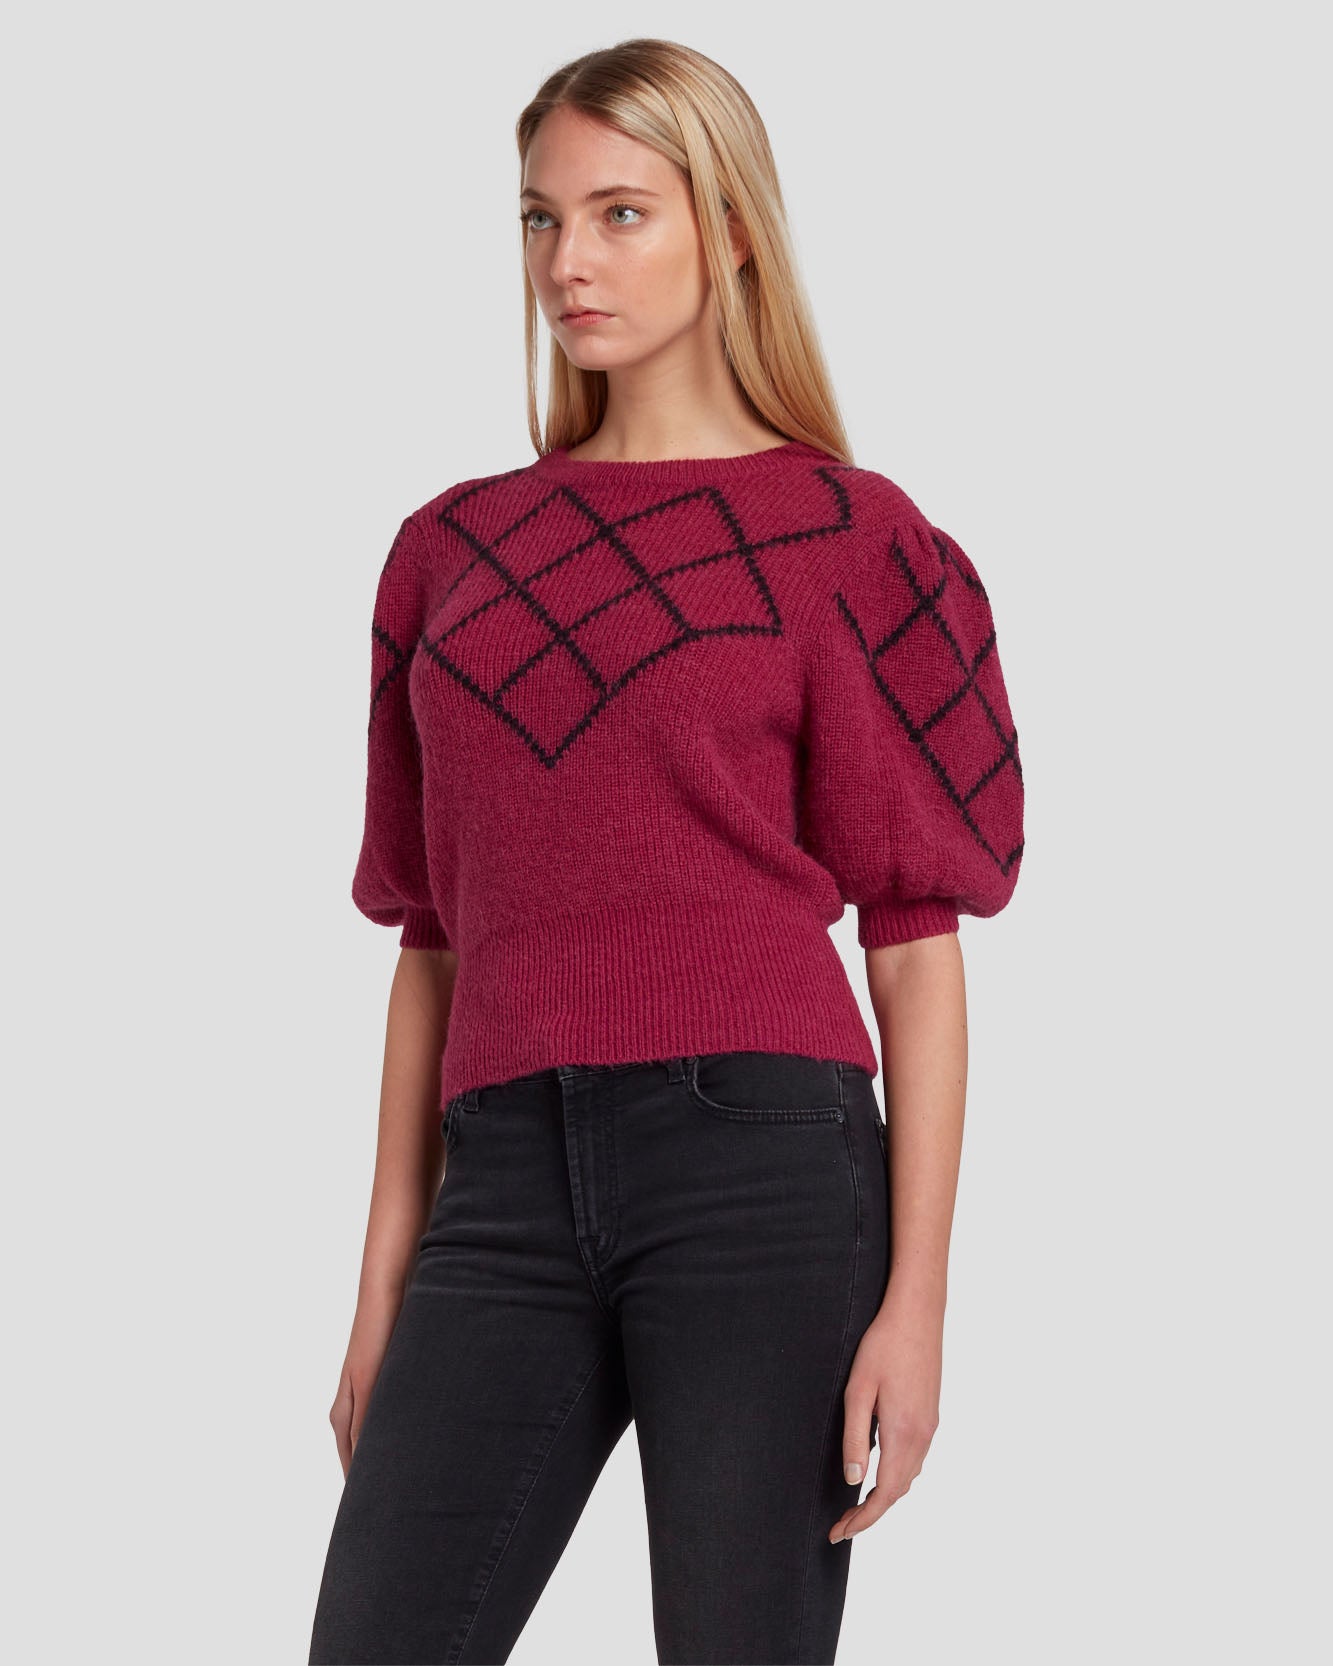 Puff Diamond Sweater in Raspberry | 7 For All Mankind